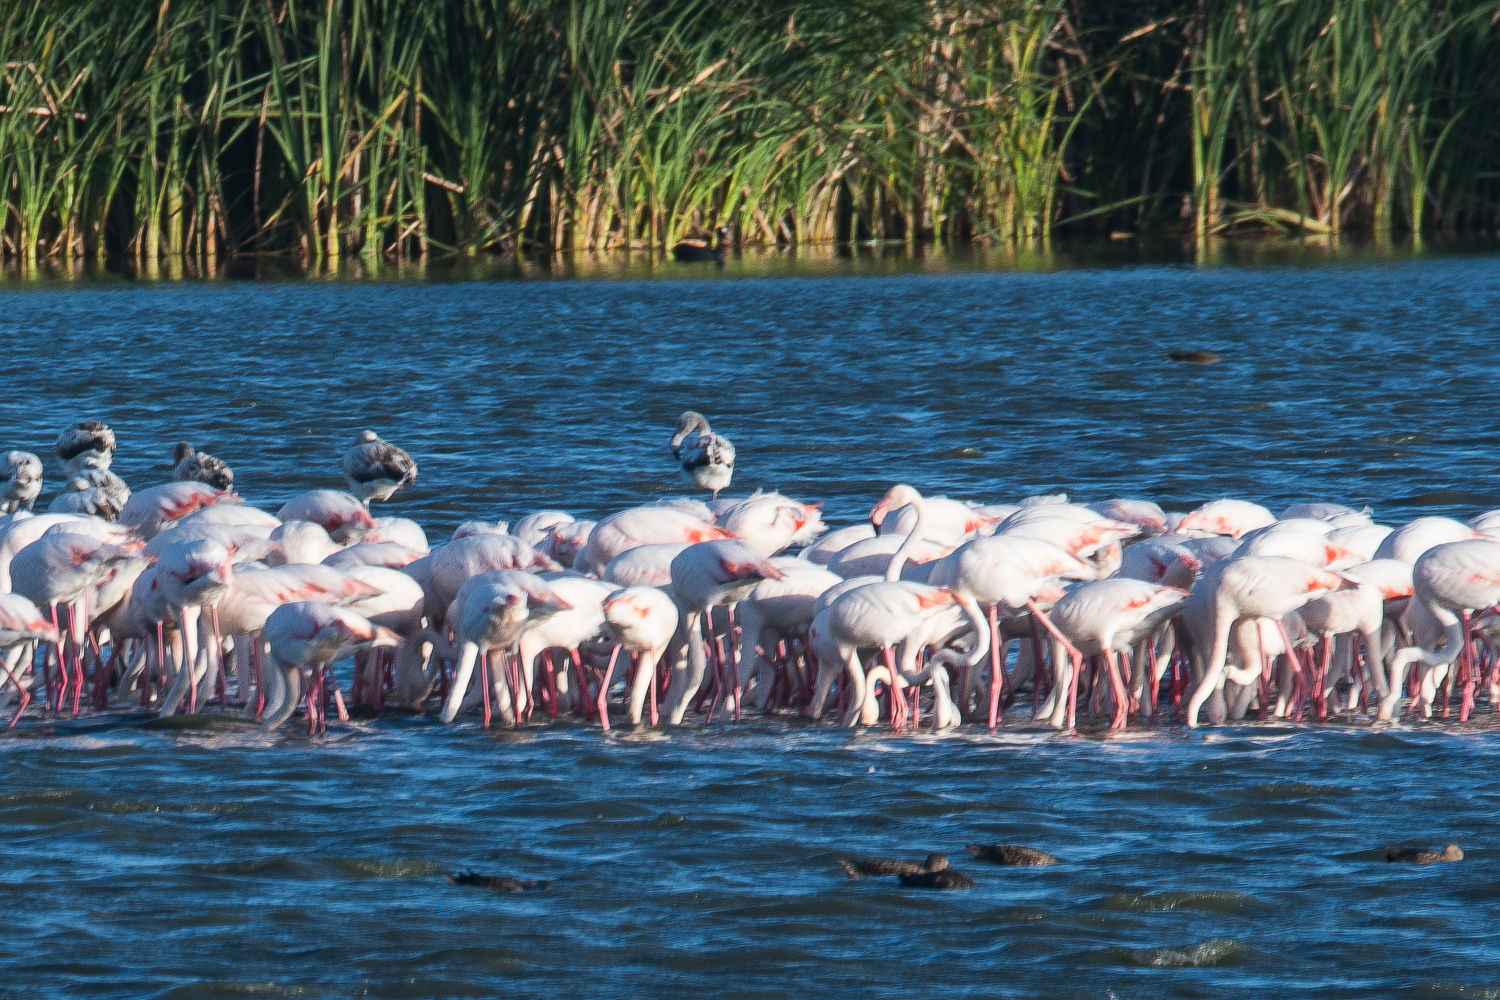 Flamants roses (Greater flamingo, Phoenicopterus roseus) adultes et juvéniles, Strandfontain sewer works.